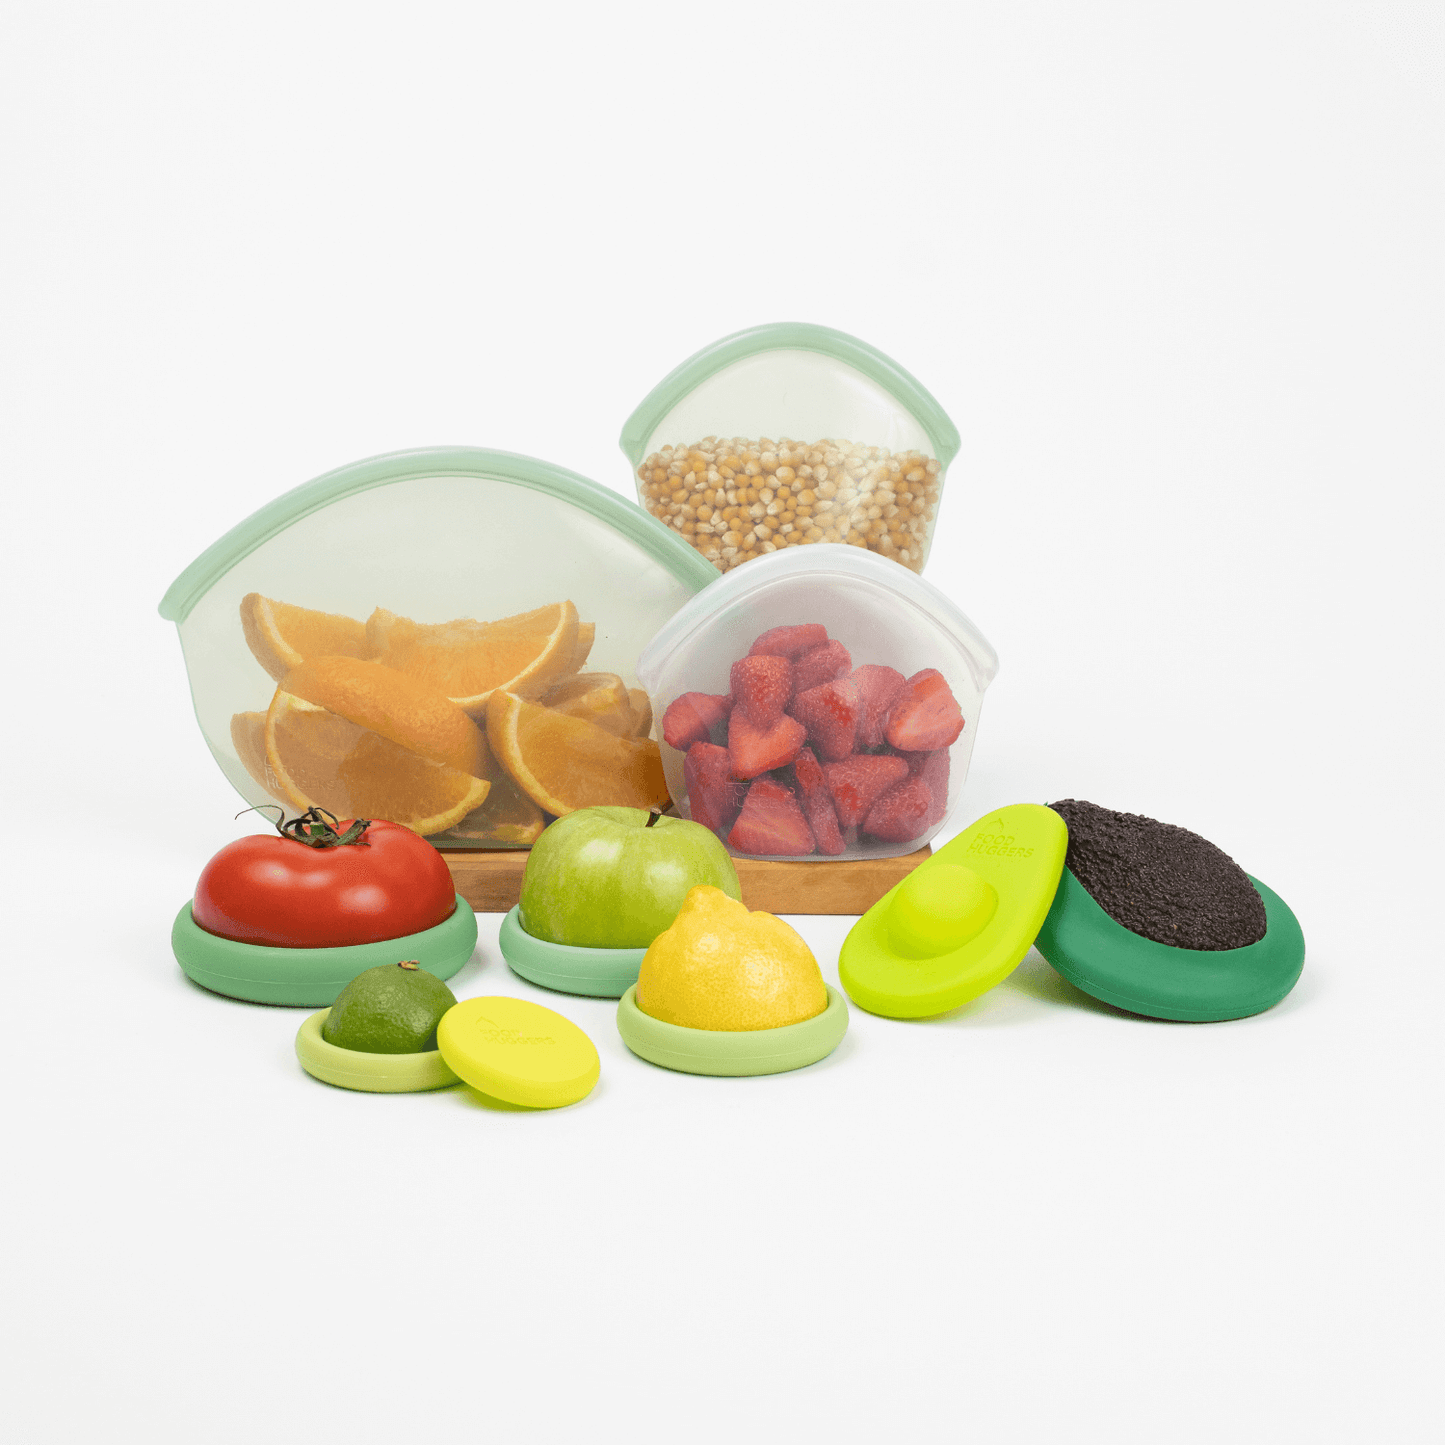 Set of ten silicone green Food Huggers, a sustainable alternative to plastic wrap, to protect fruits and vegetables